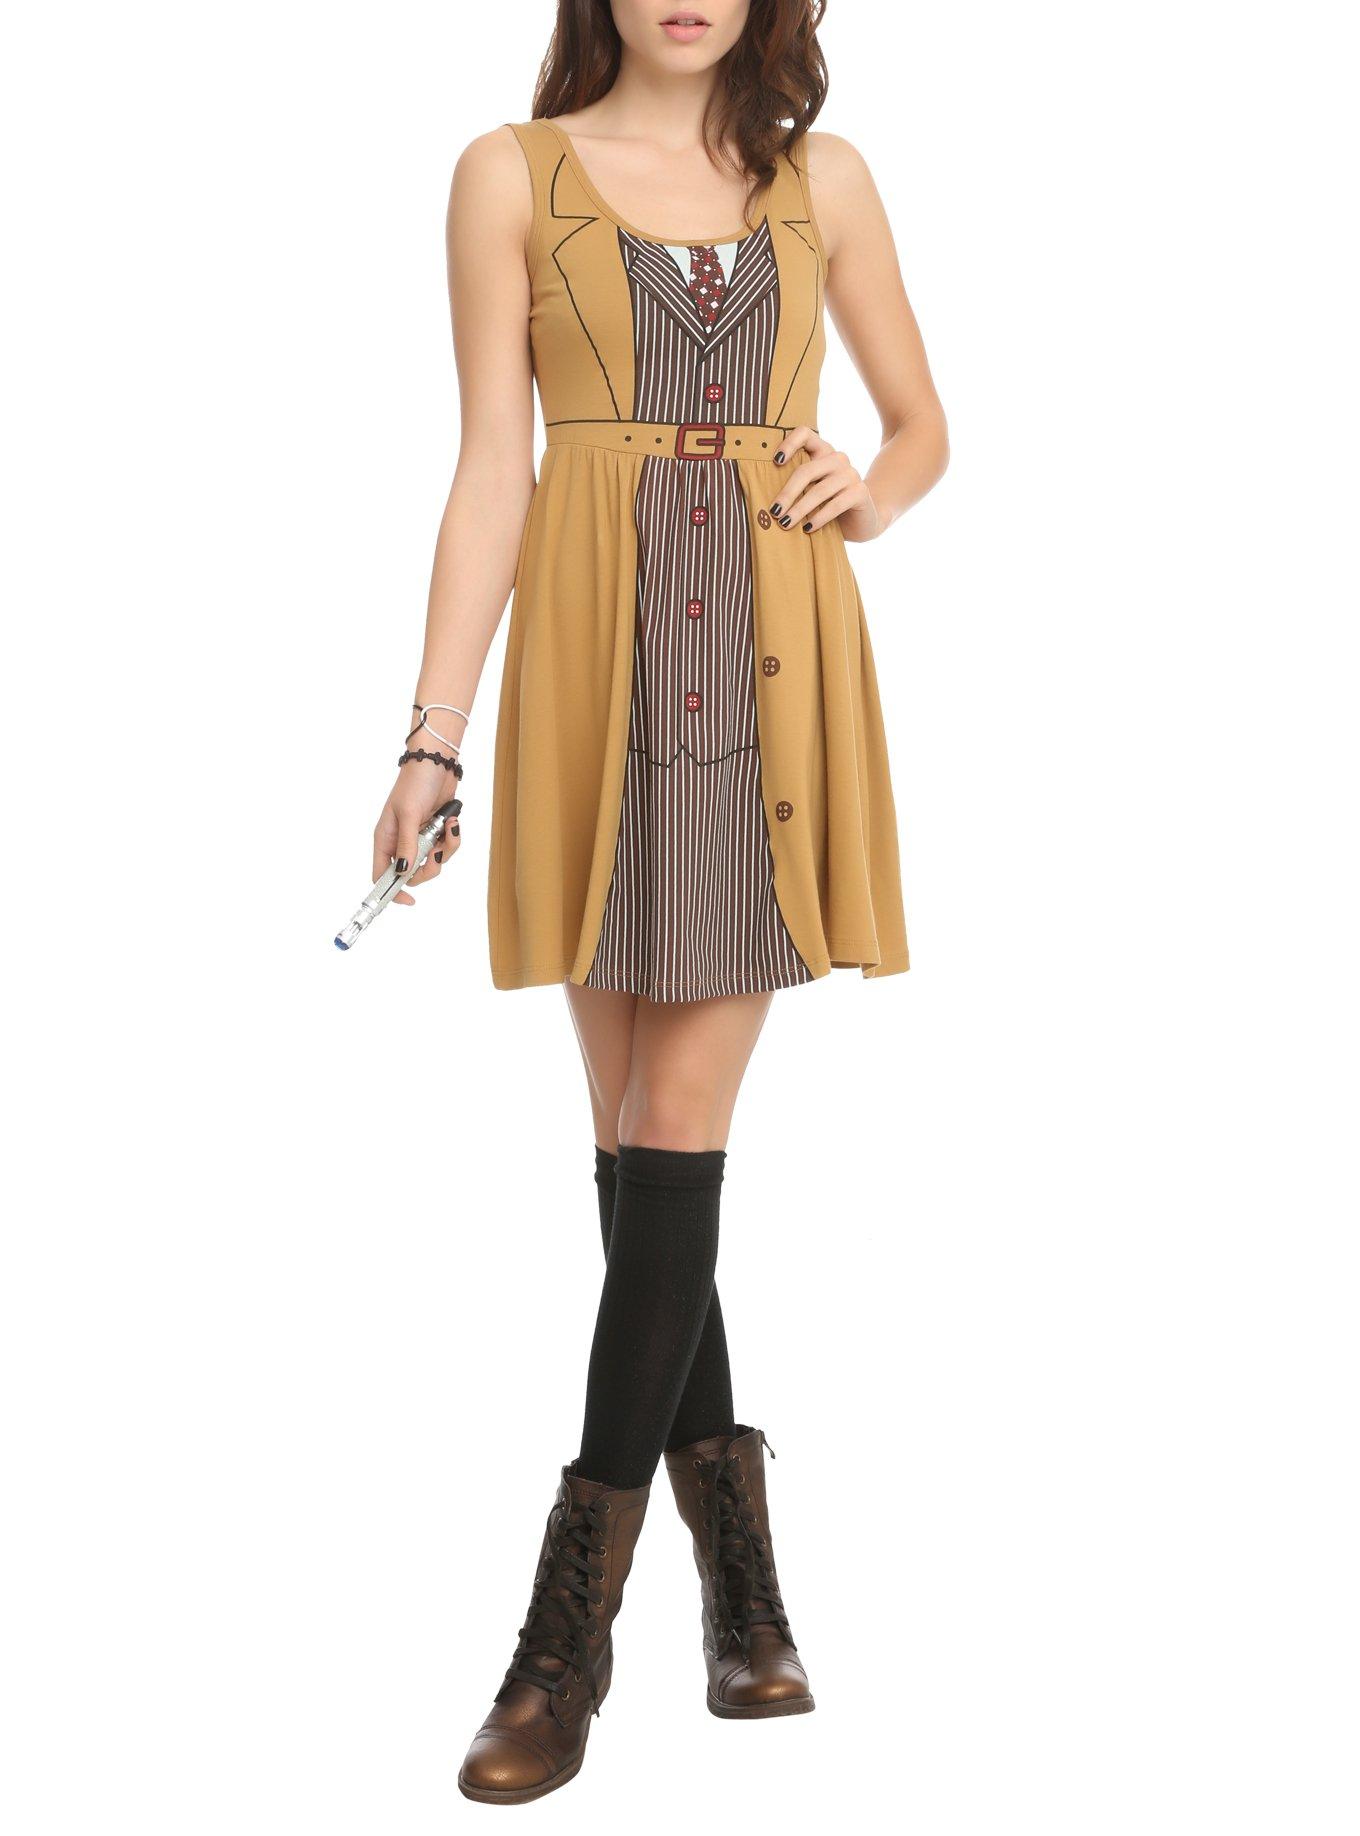 Doctor Who Her Universe David Tennant Tenth Doctor Costume Dress, , hi-res